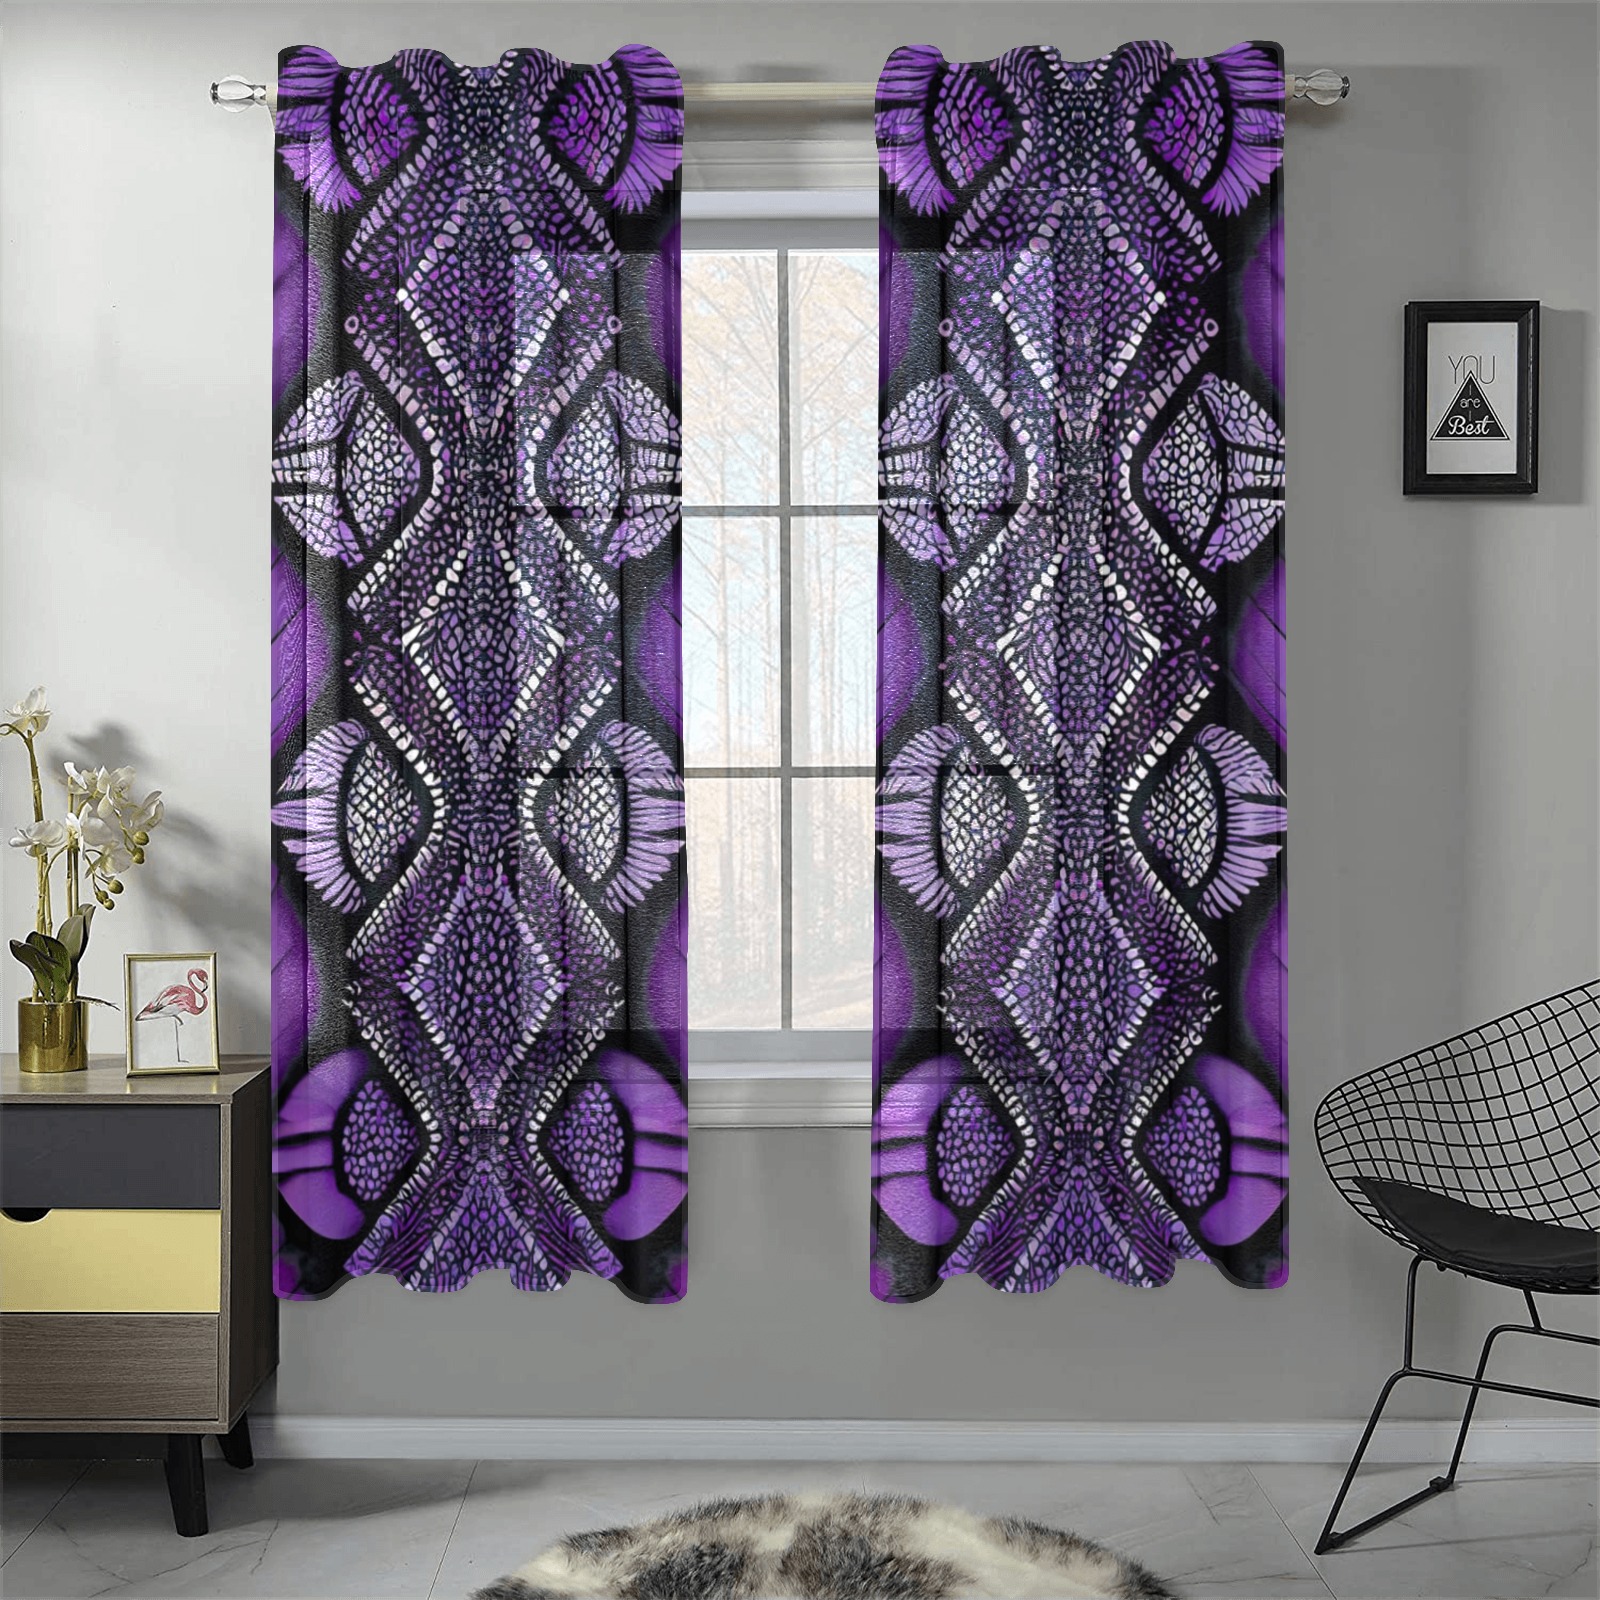 violet and white diamond's Gauze Curtain 28"x63" (Two-Piece)